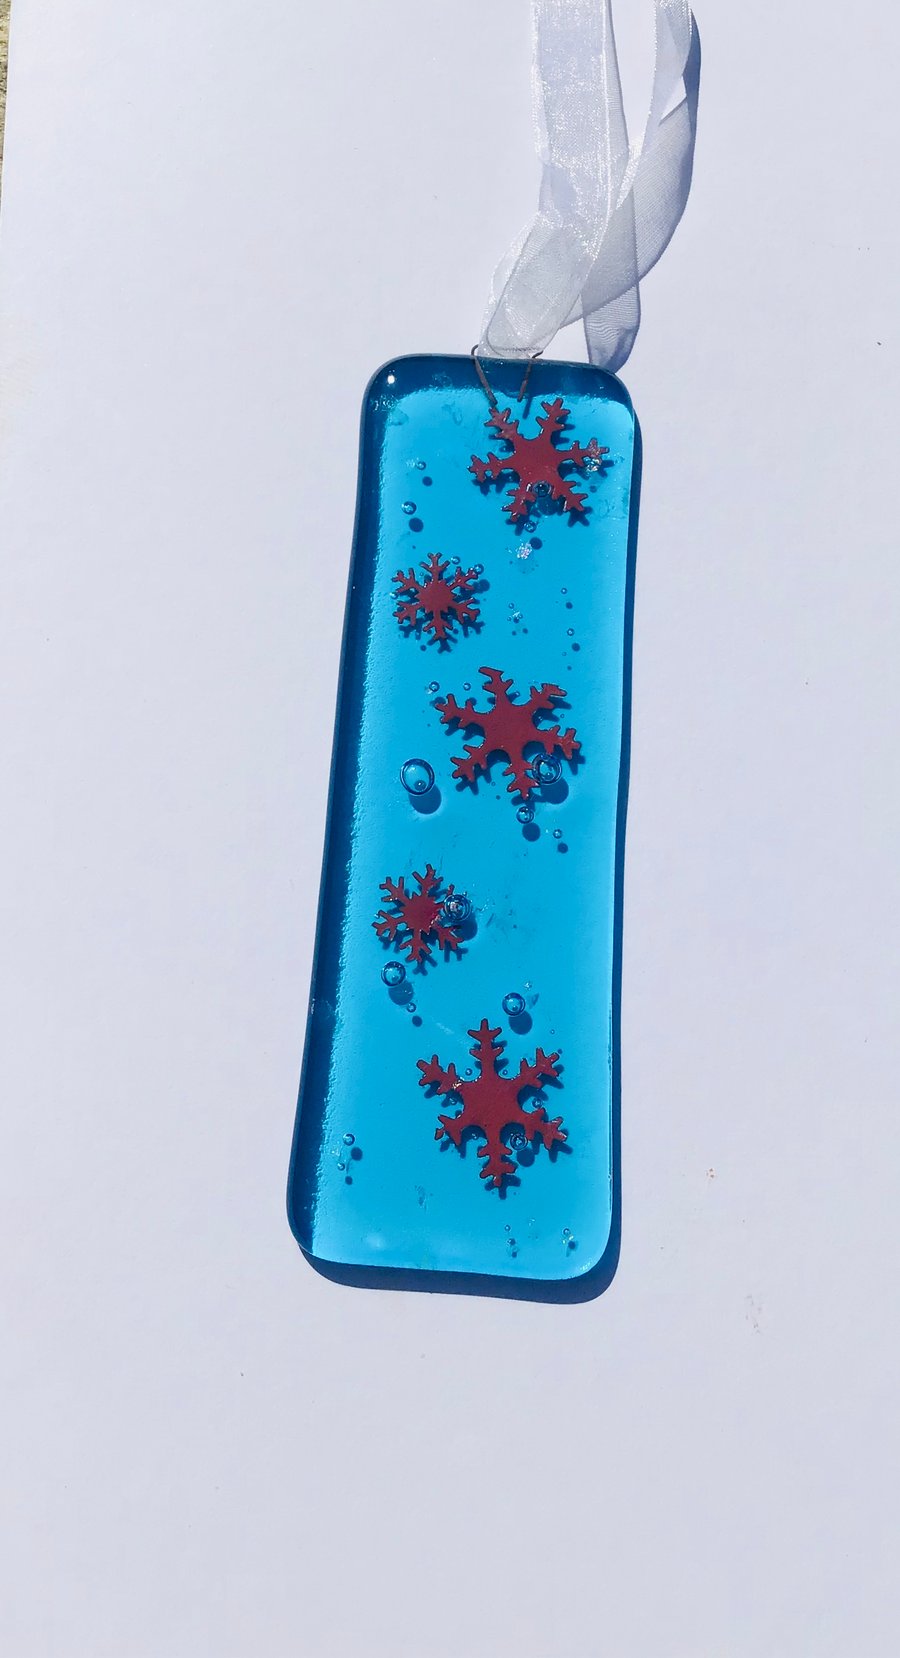  Christmas Snowflakes in blue glass hanging